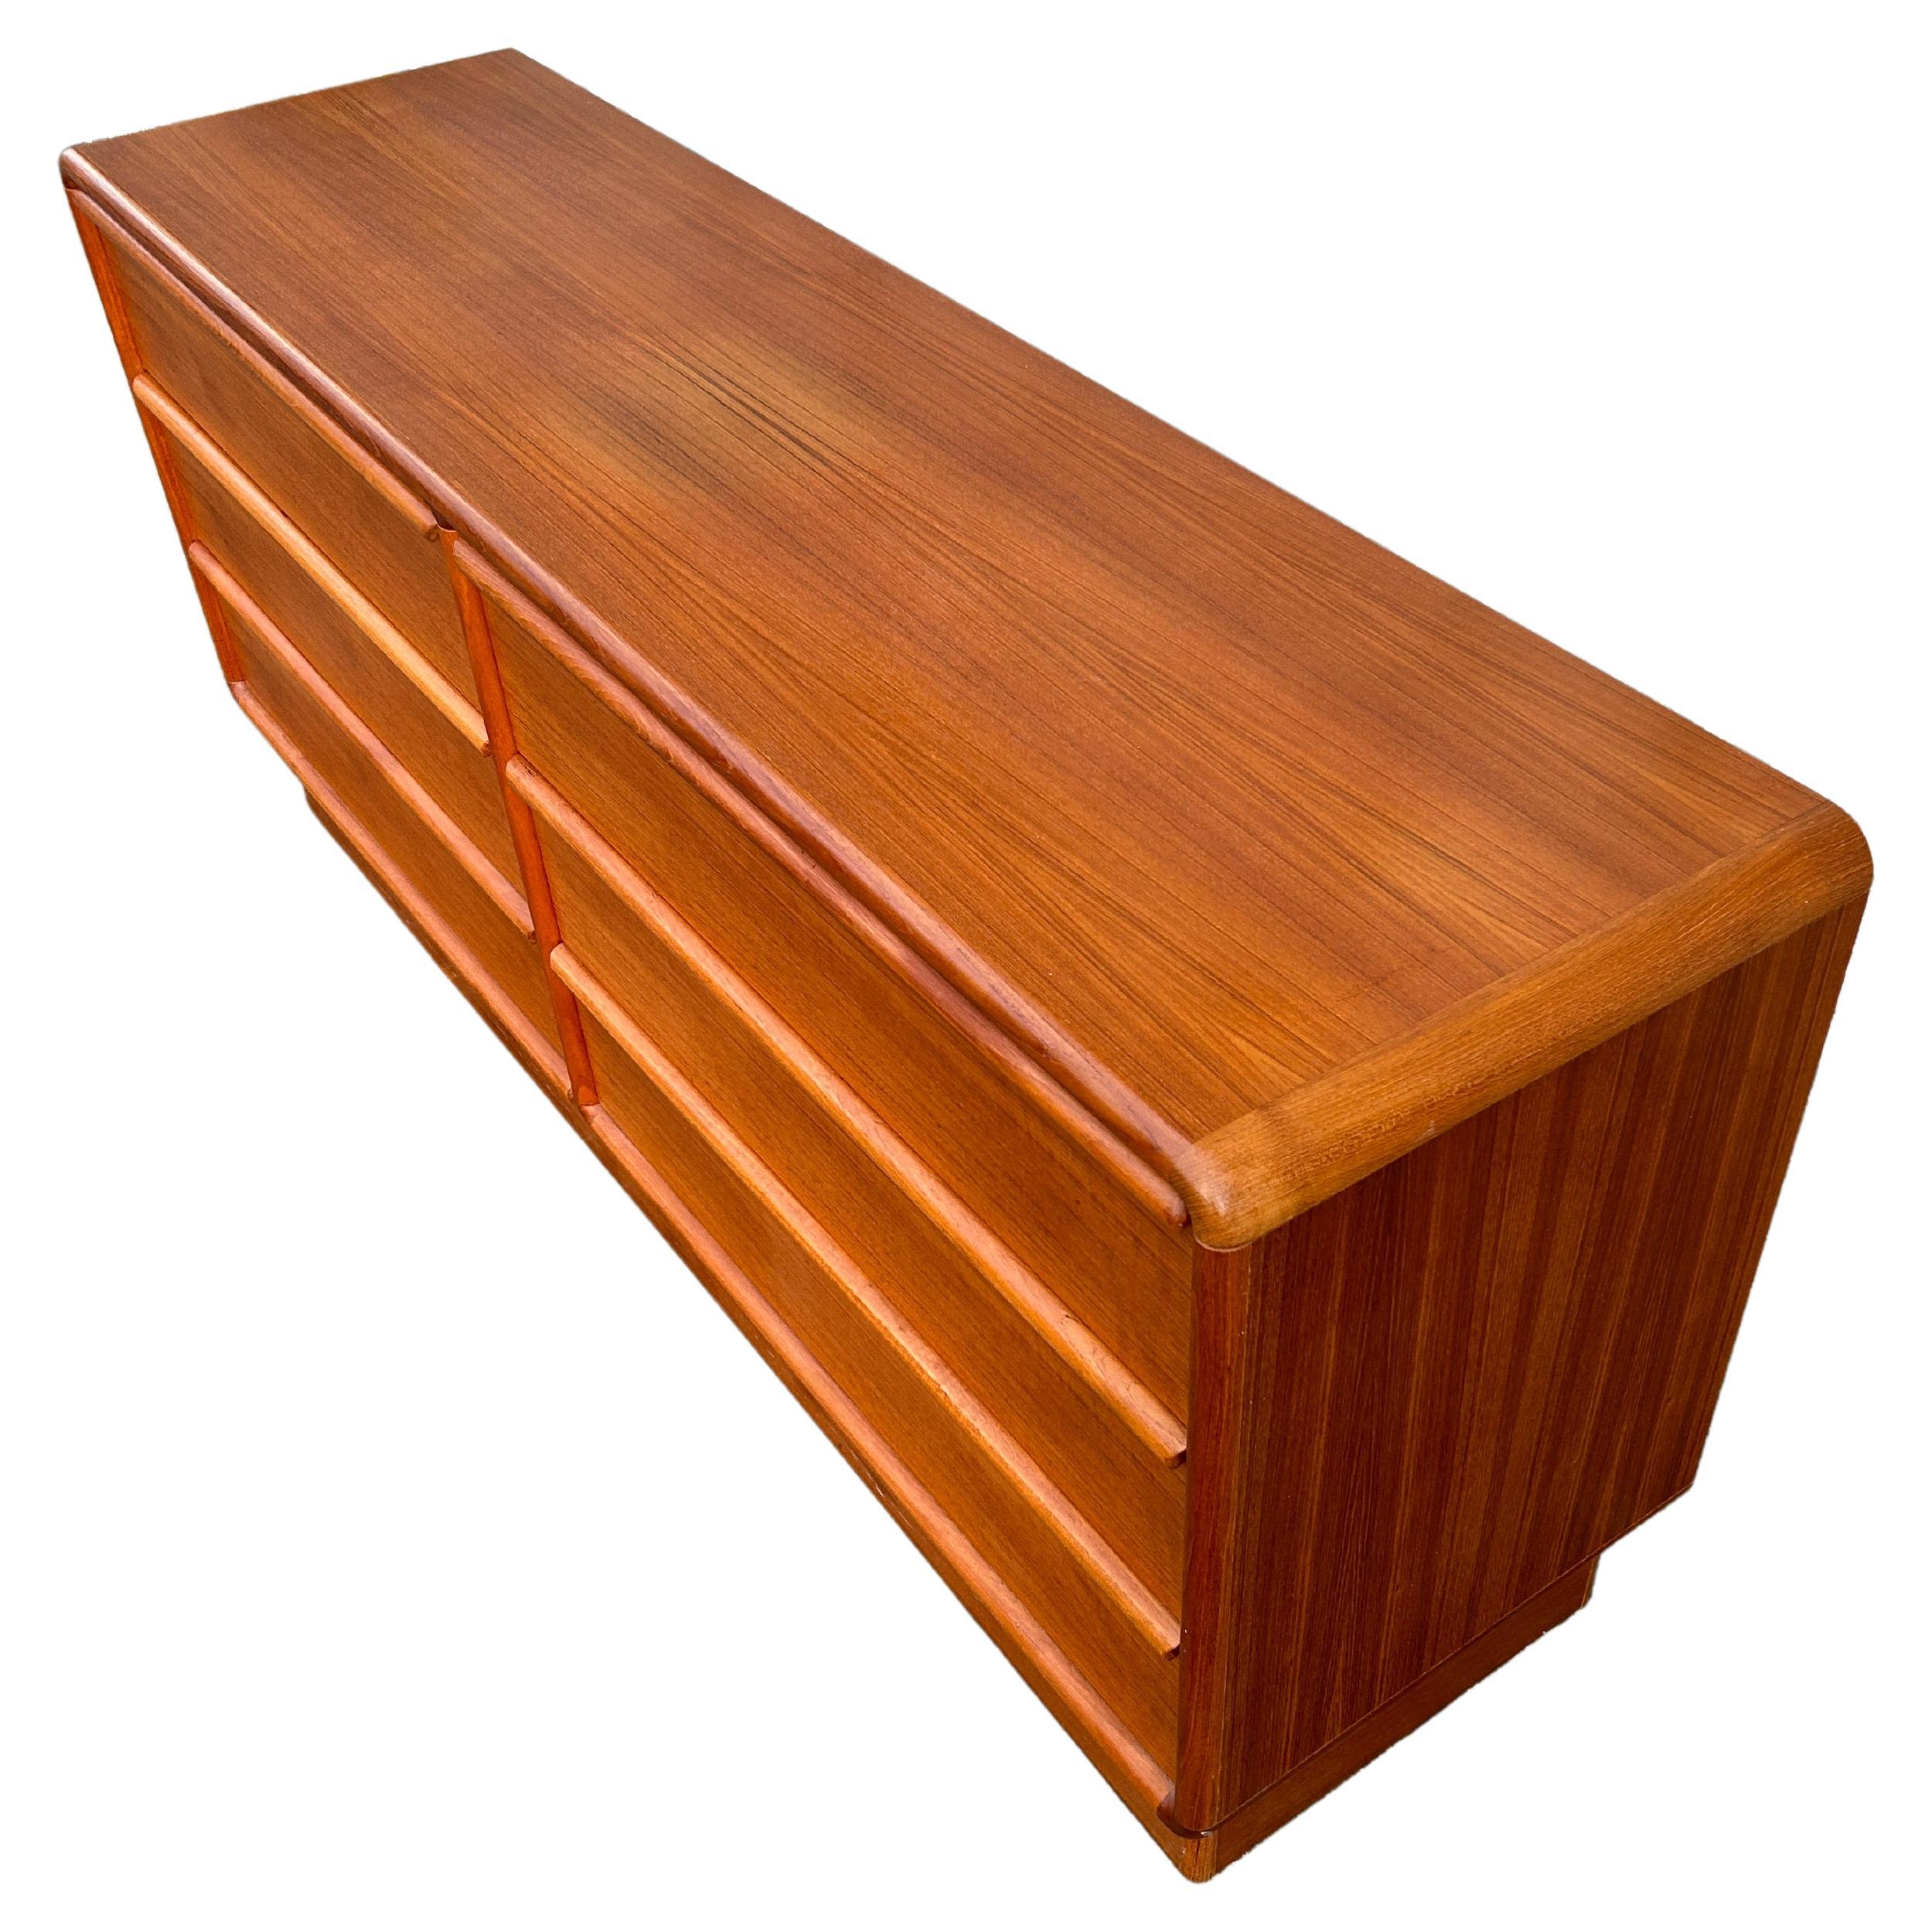 midcentury Danish Modern 6 drawer rounded teak dresser or credenza by Kibaek Mobler. Beautiful rounded teak with a nice grain. All drawers clean inside and out as well as slide smooth on drawer tracks. Simple symmetric design - Very clean. Shows